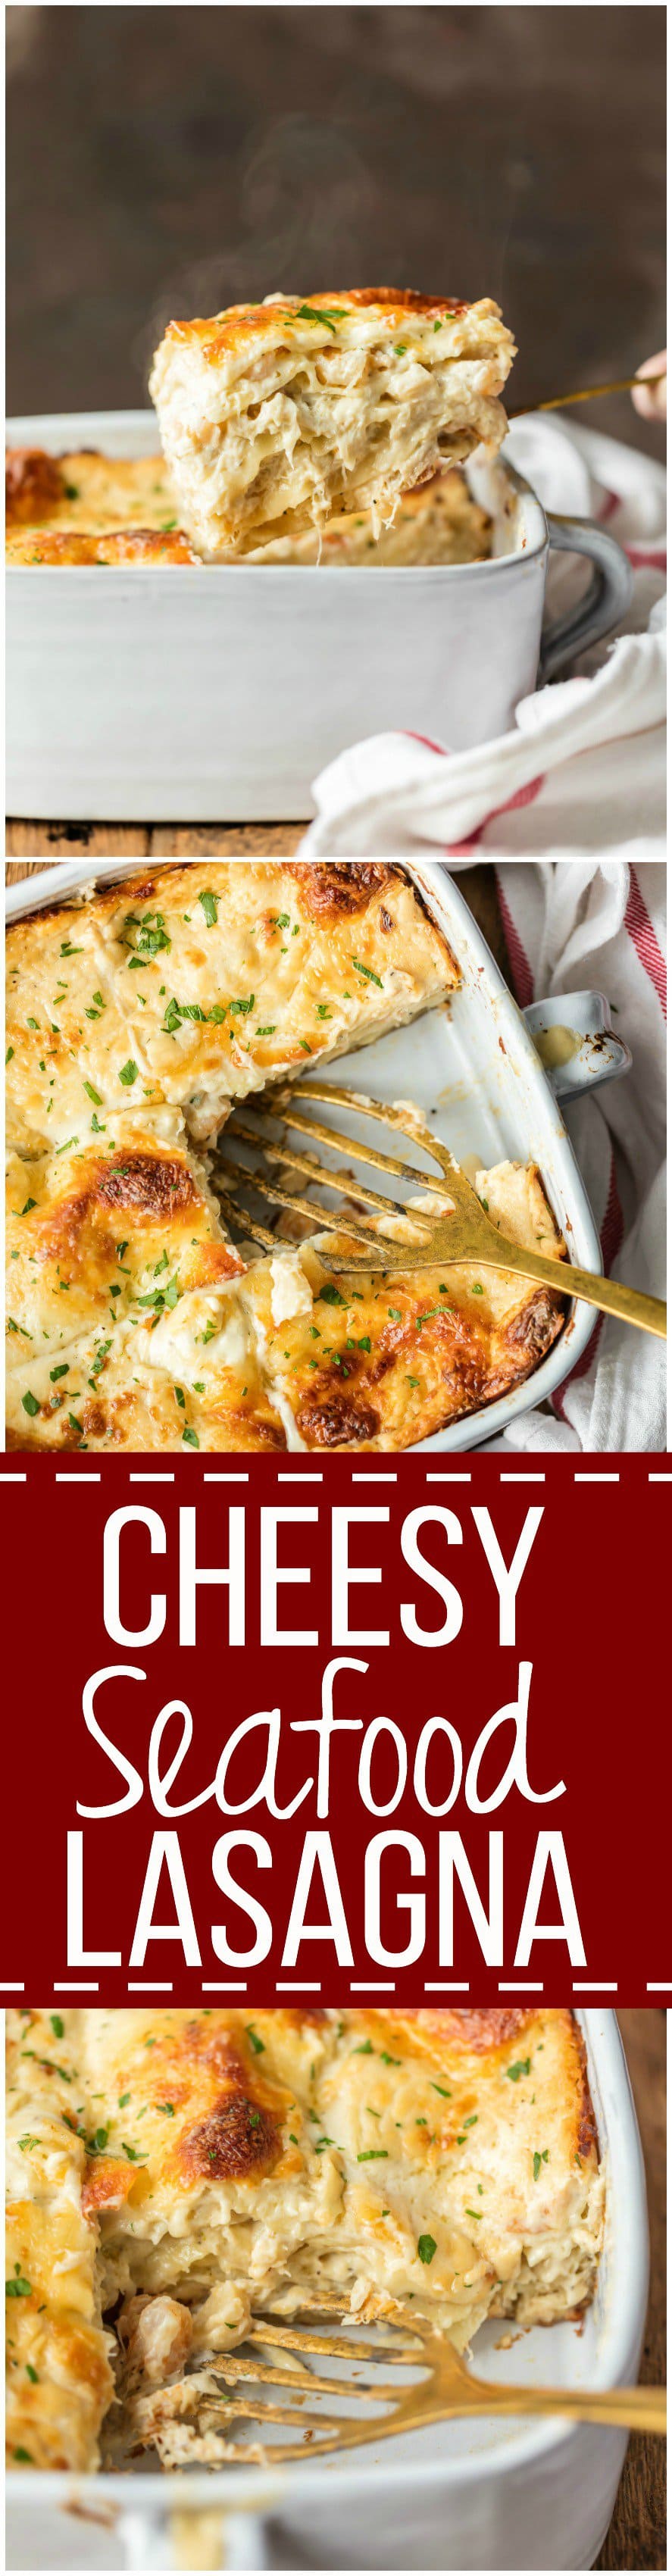 Cheesy Seafood Lasagna - The Cookie Rookie®